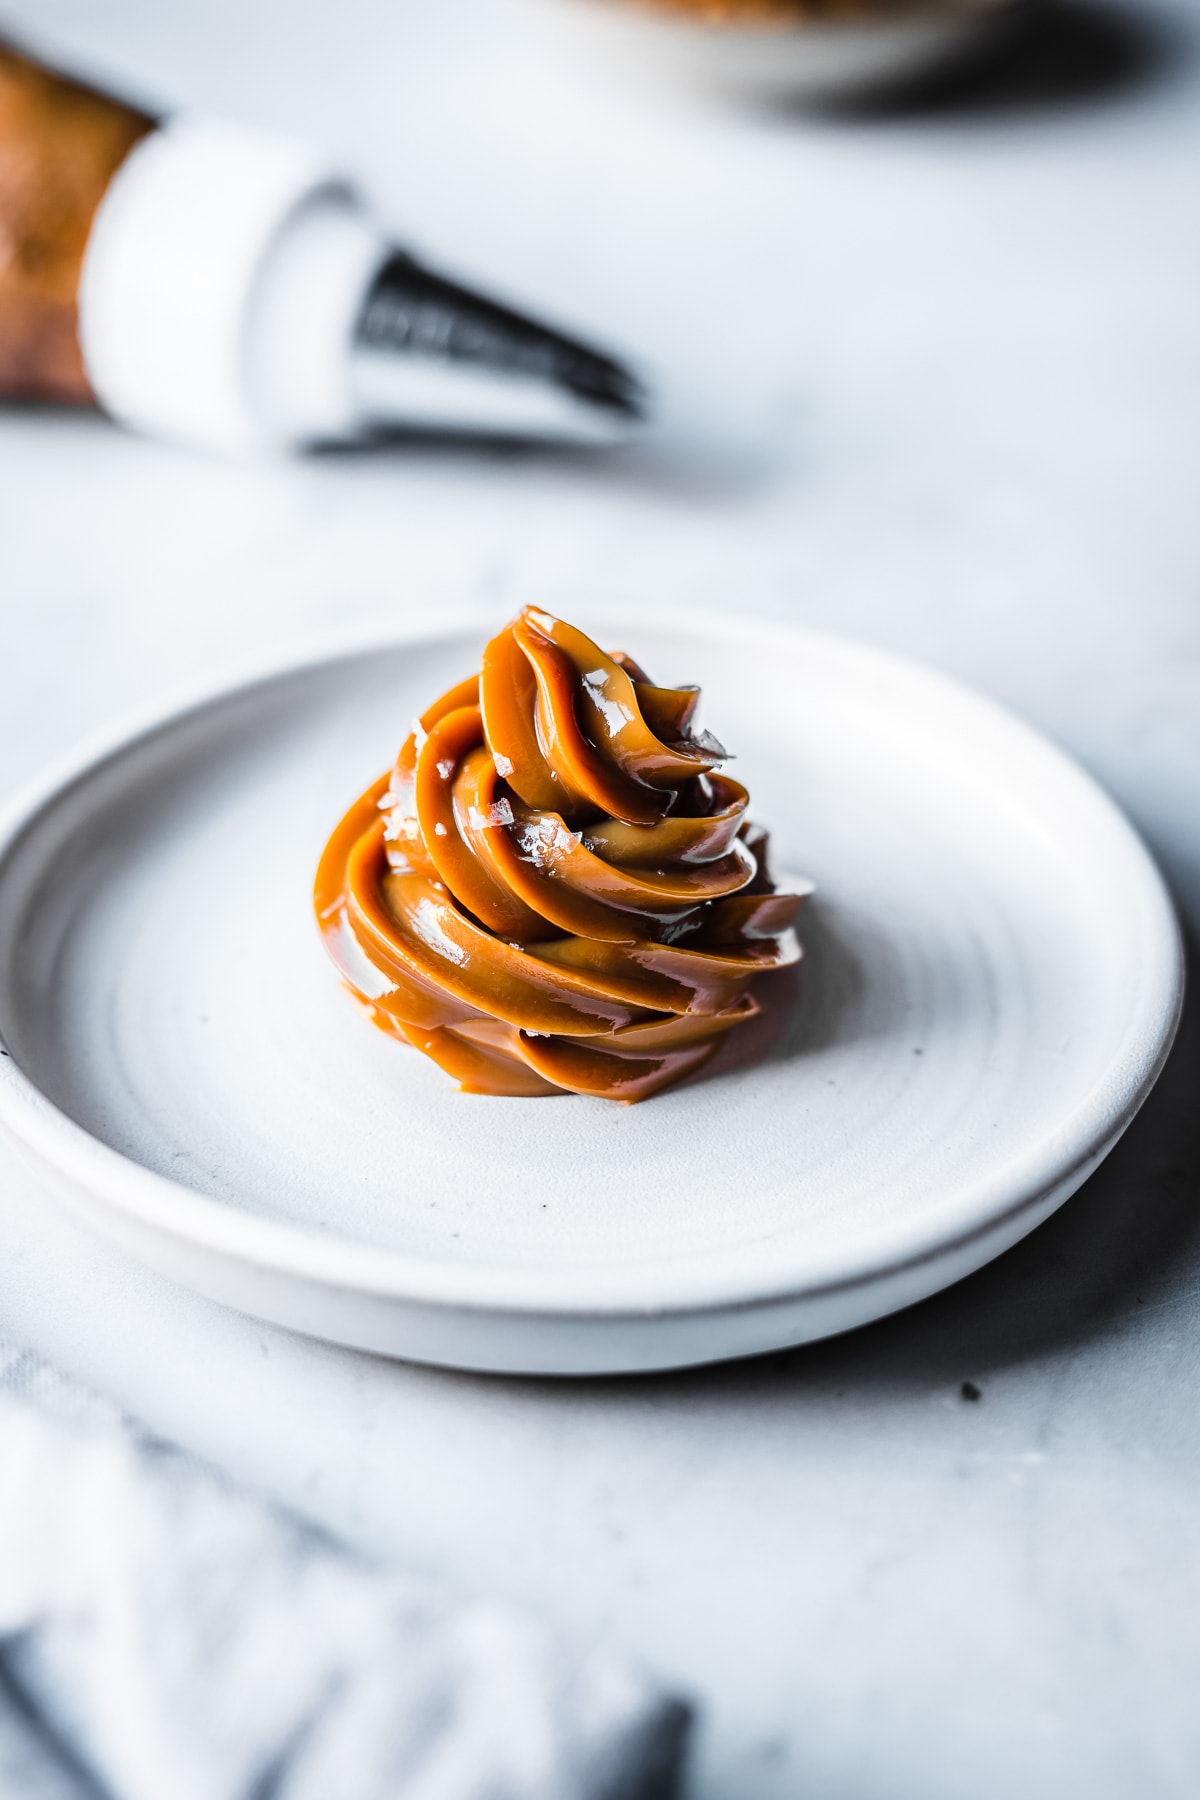 Piped dulce de leche on a white ceramic plate, sprinkled with sea salt flakes. A piping bag rests out of focus in the background. A blurry pale blue napkin peeks into the foreground.